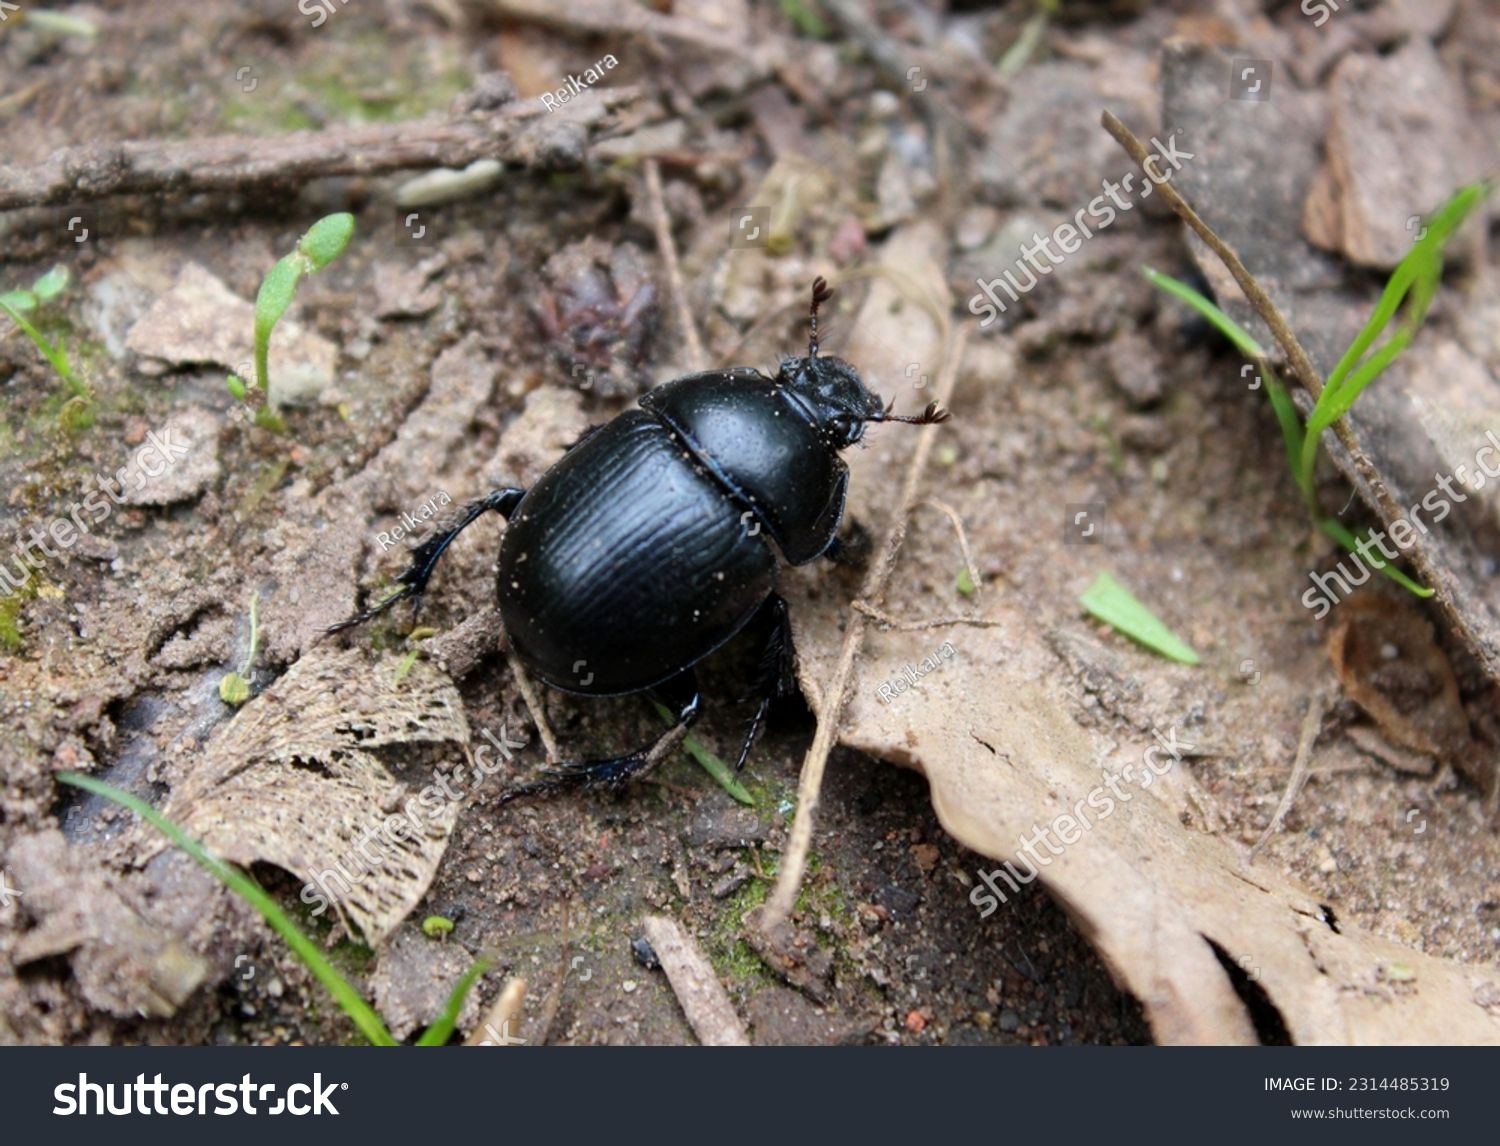 Anoplotrupes stercorosus , dor beetle,dor beetle, animal, animal forest, anoplotrupes stercorosus, beetle insect, beets, black, closeup, dung beetle, environment, fauna, forest, garden, insect, macro, #2314485319